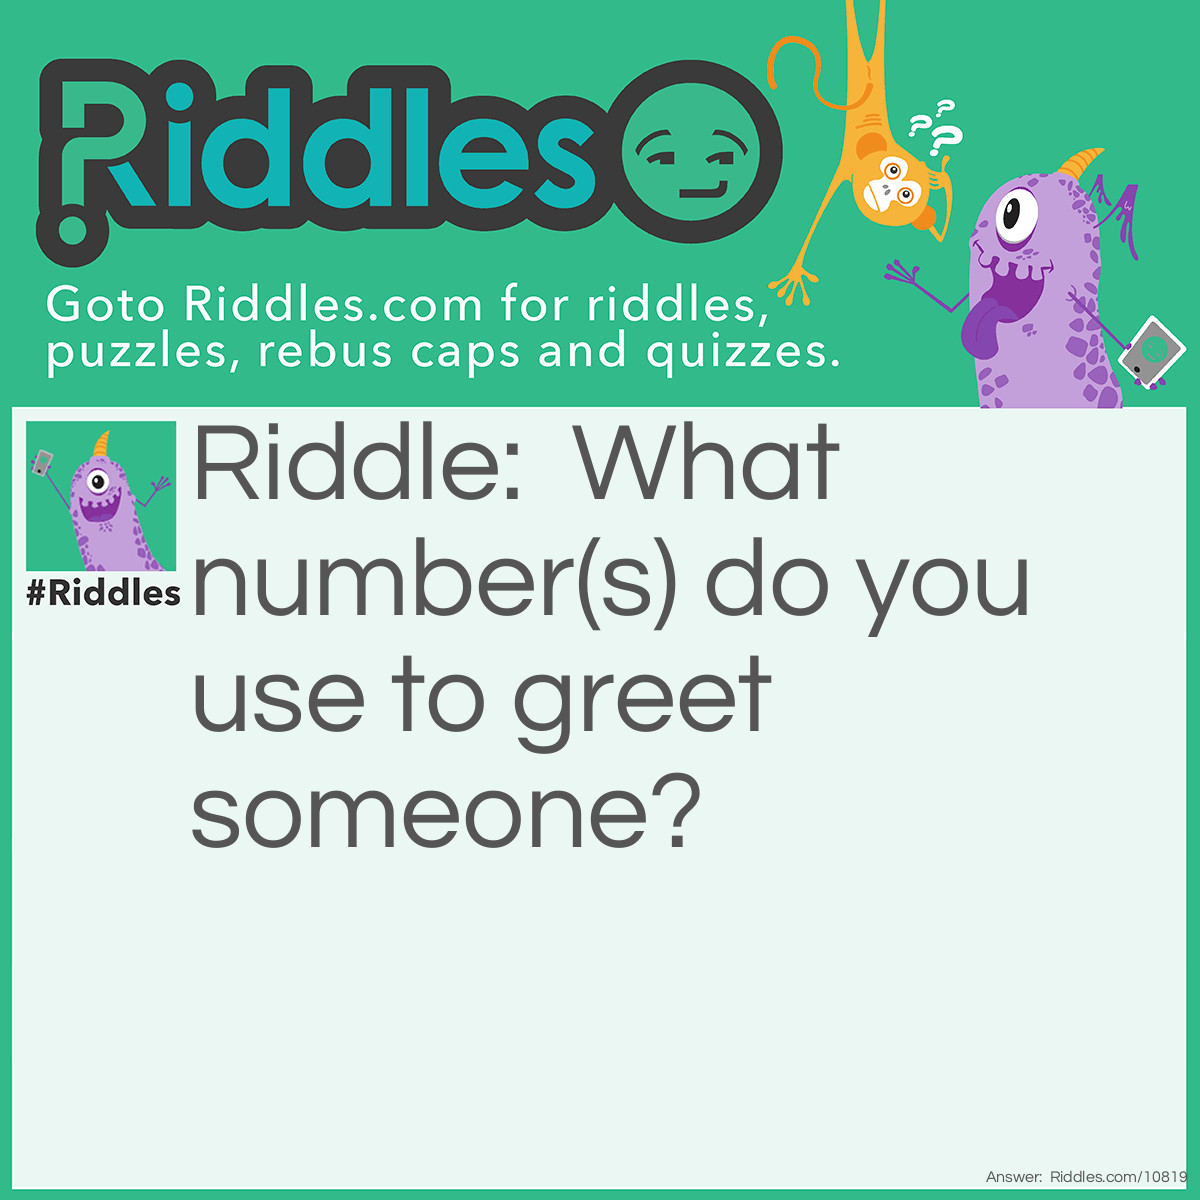 Riddle: What number(s) do you use to greet someone? Answer: 07734 Get it? Write it in robotic form and turn it around. What do you get?: hELLO